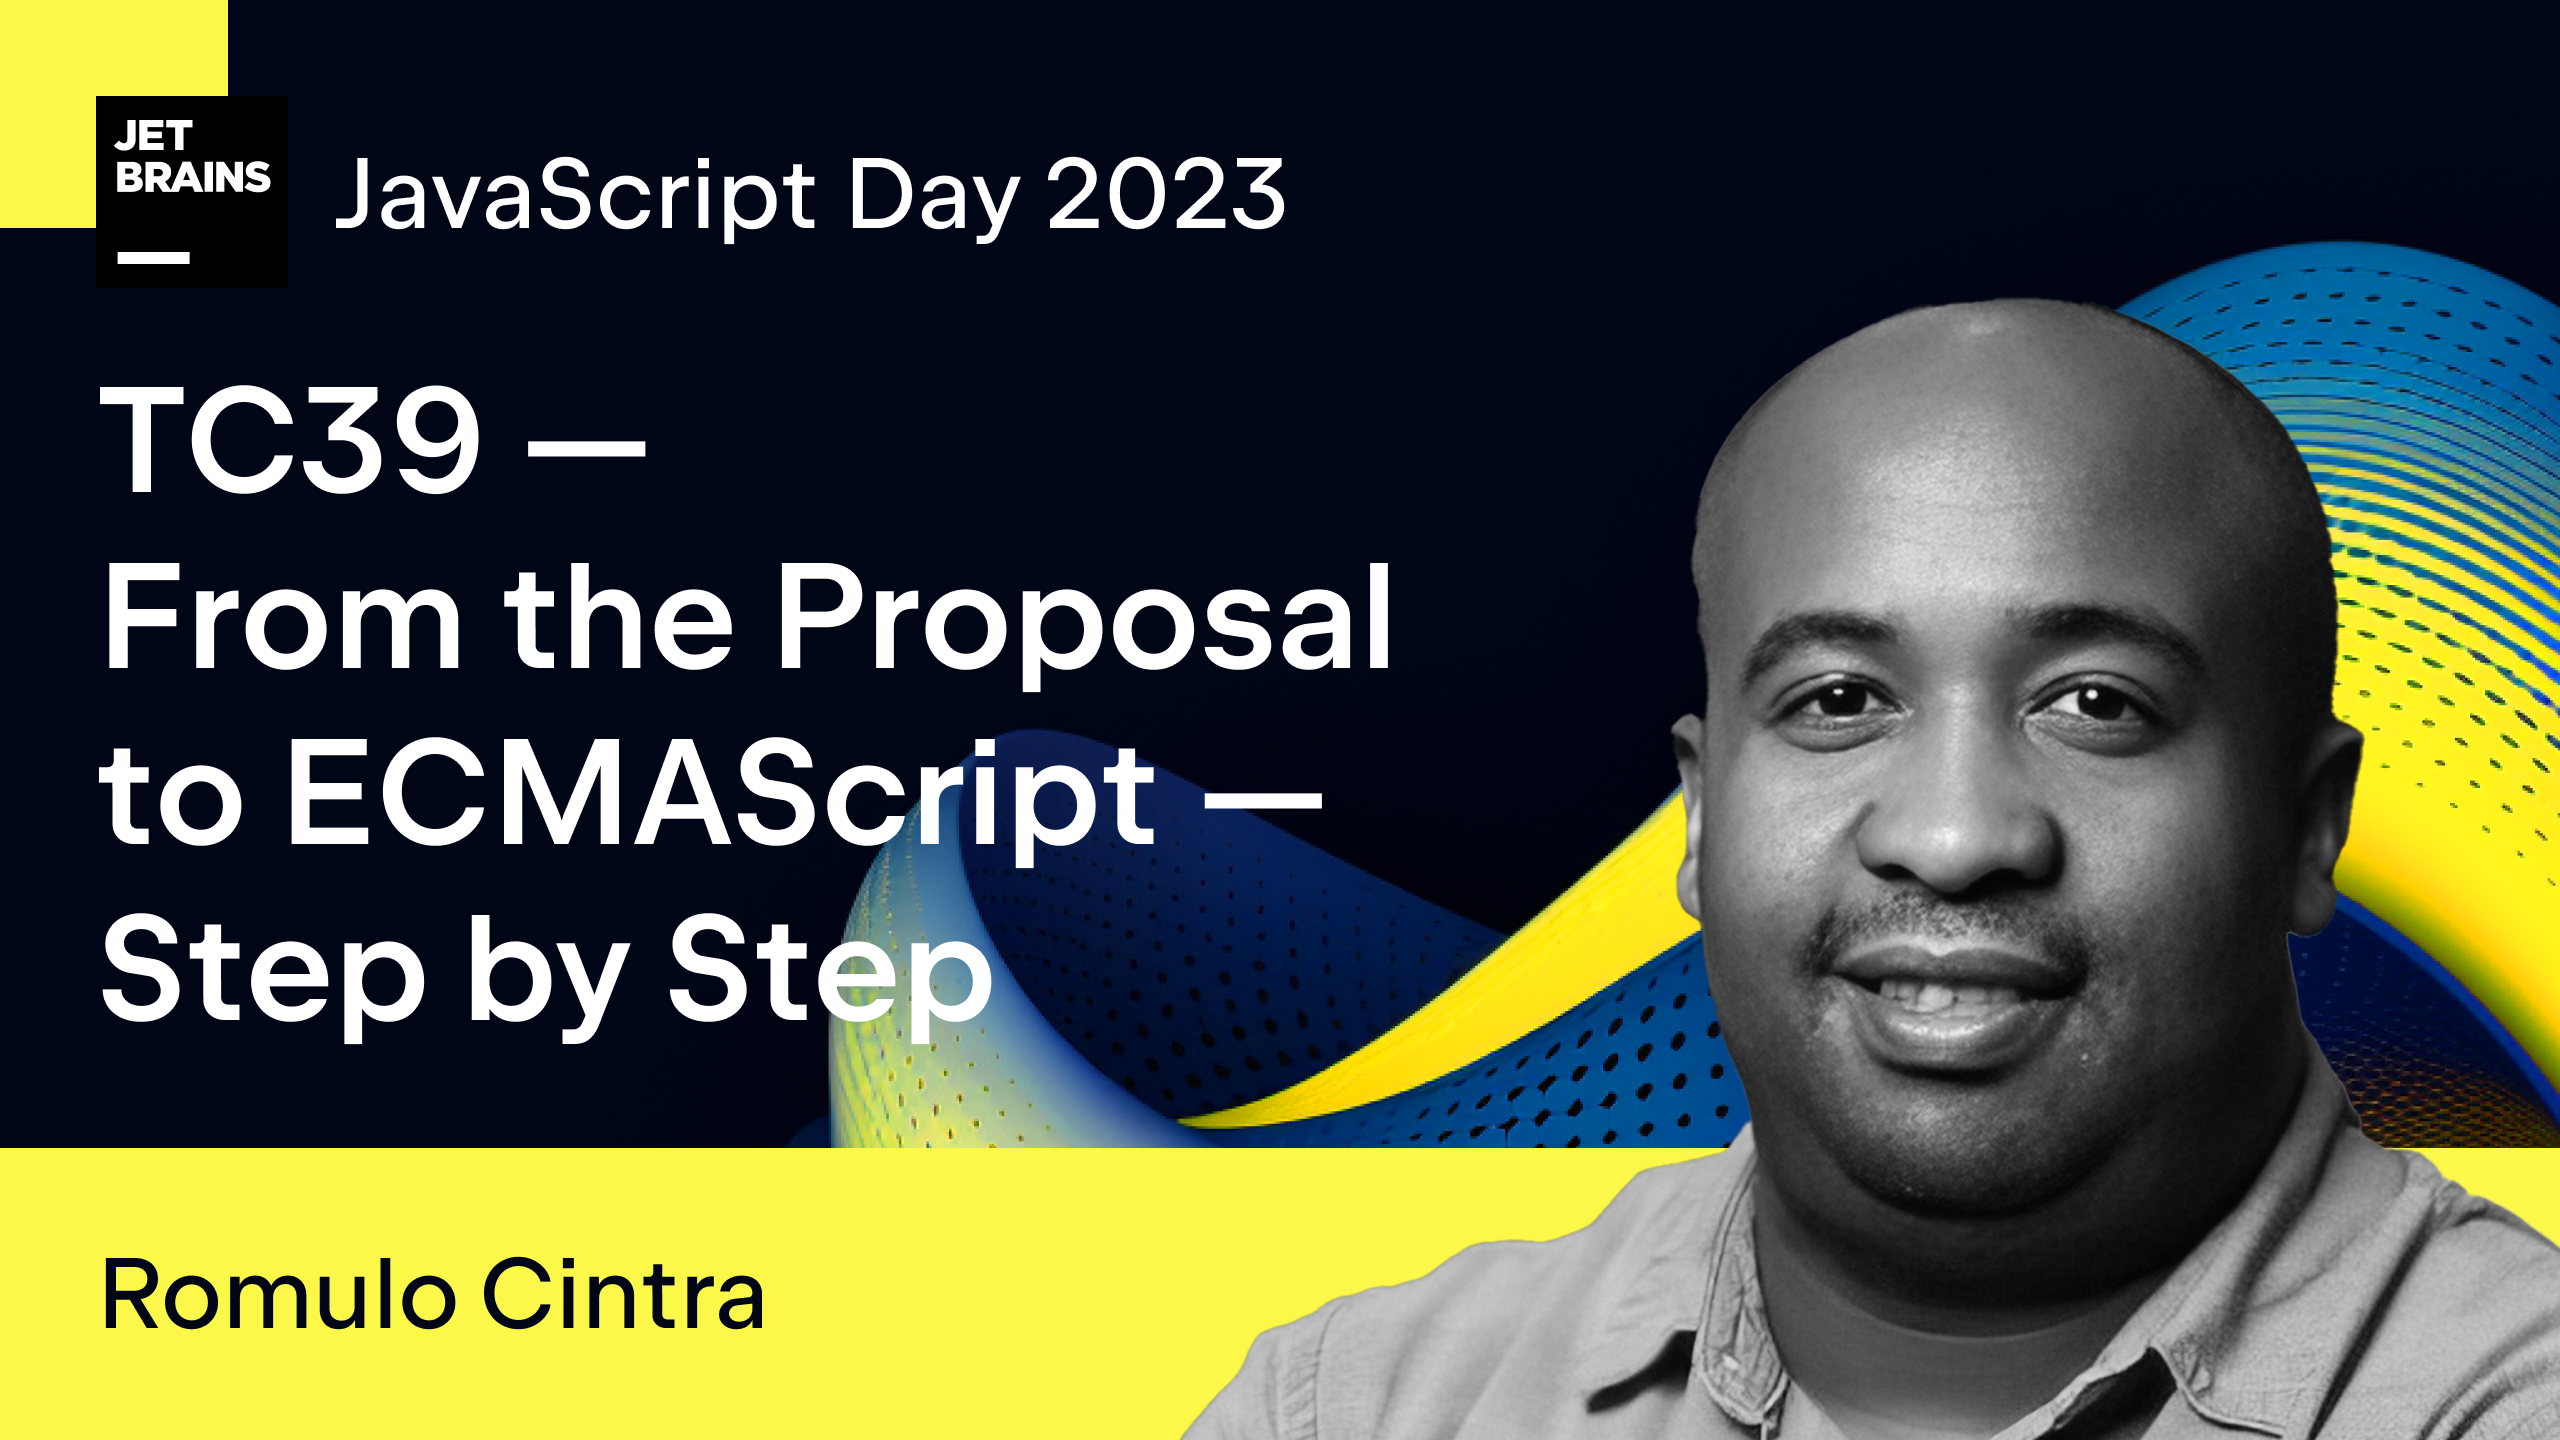 TC39 - From the Proposal to ECMAScript - Step by Step